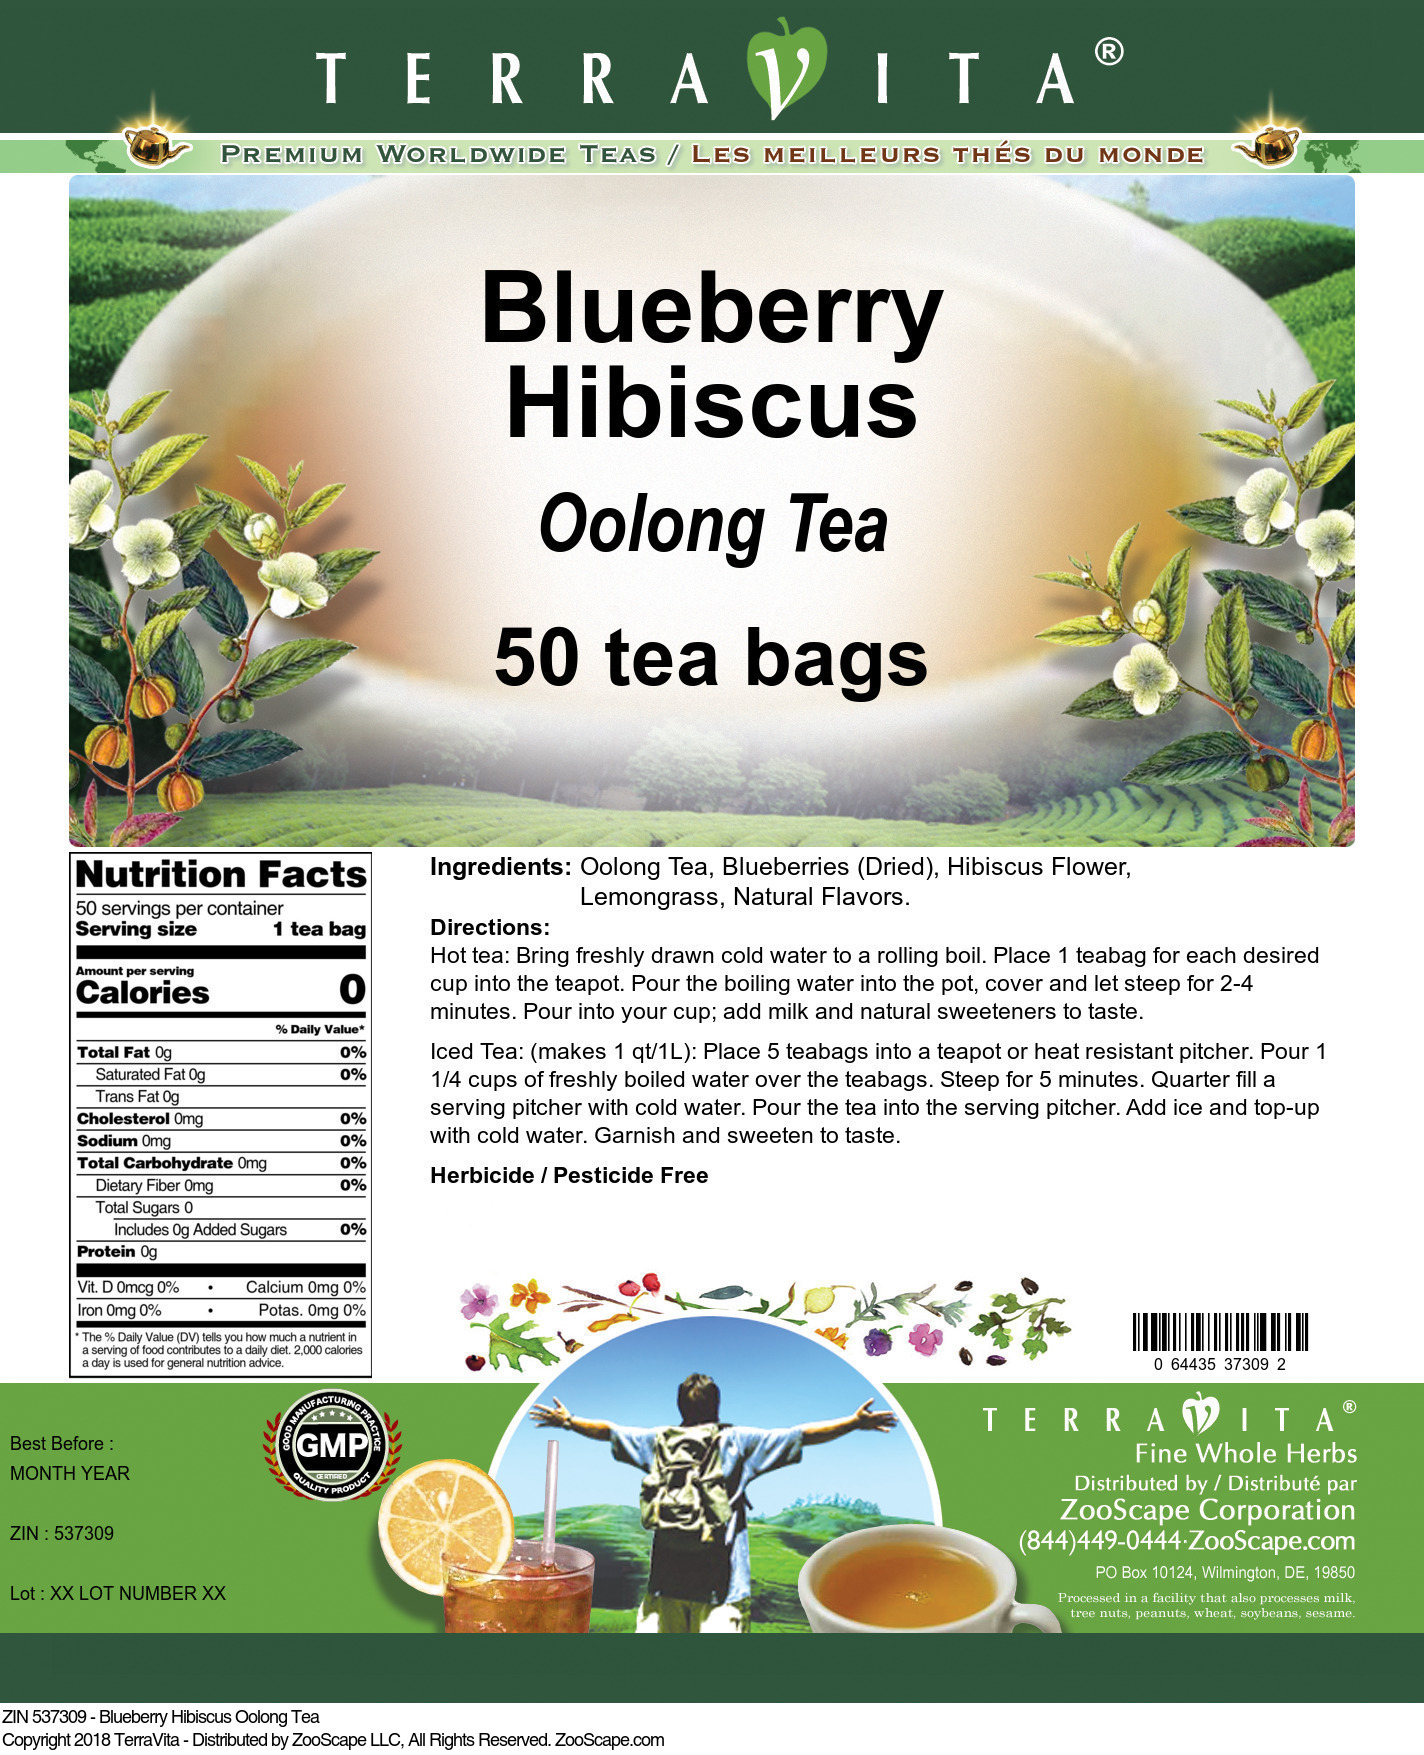 Blueberry Hibiscus Oolong Tea - Label